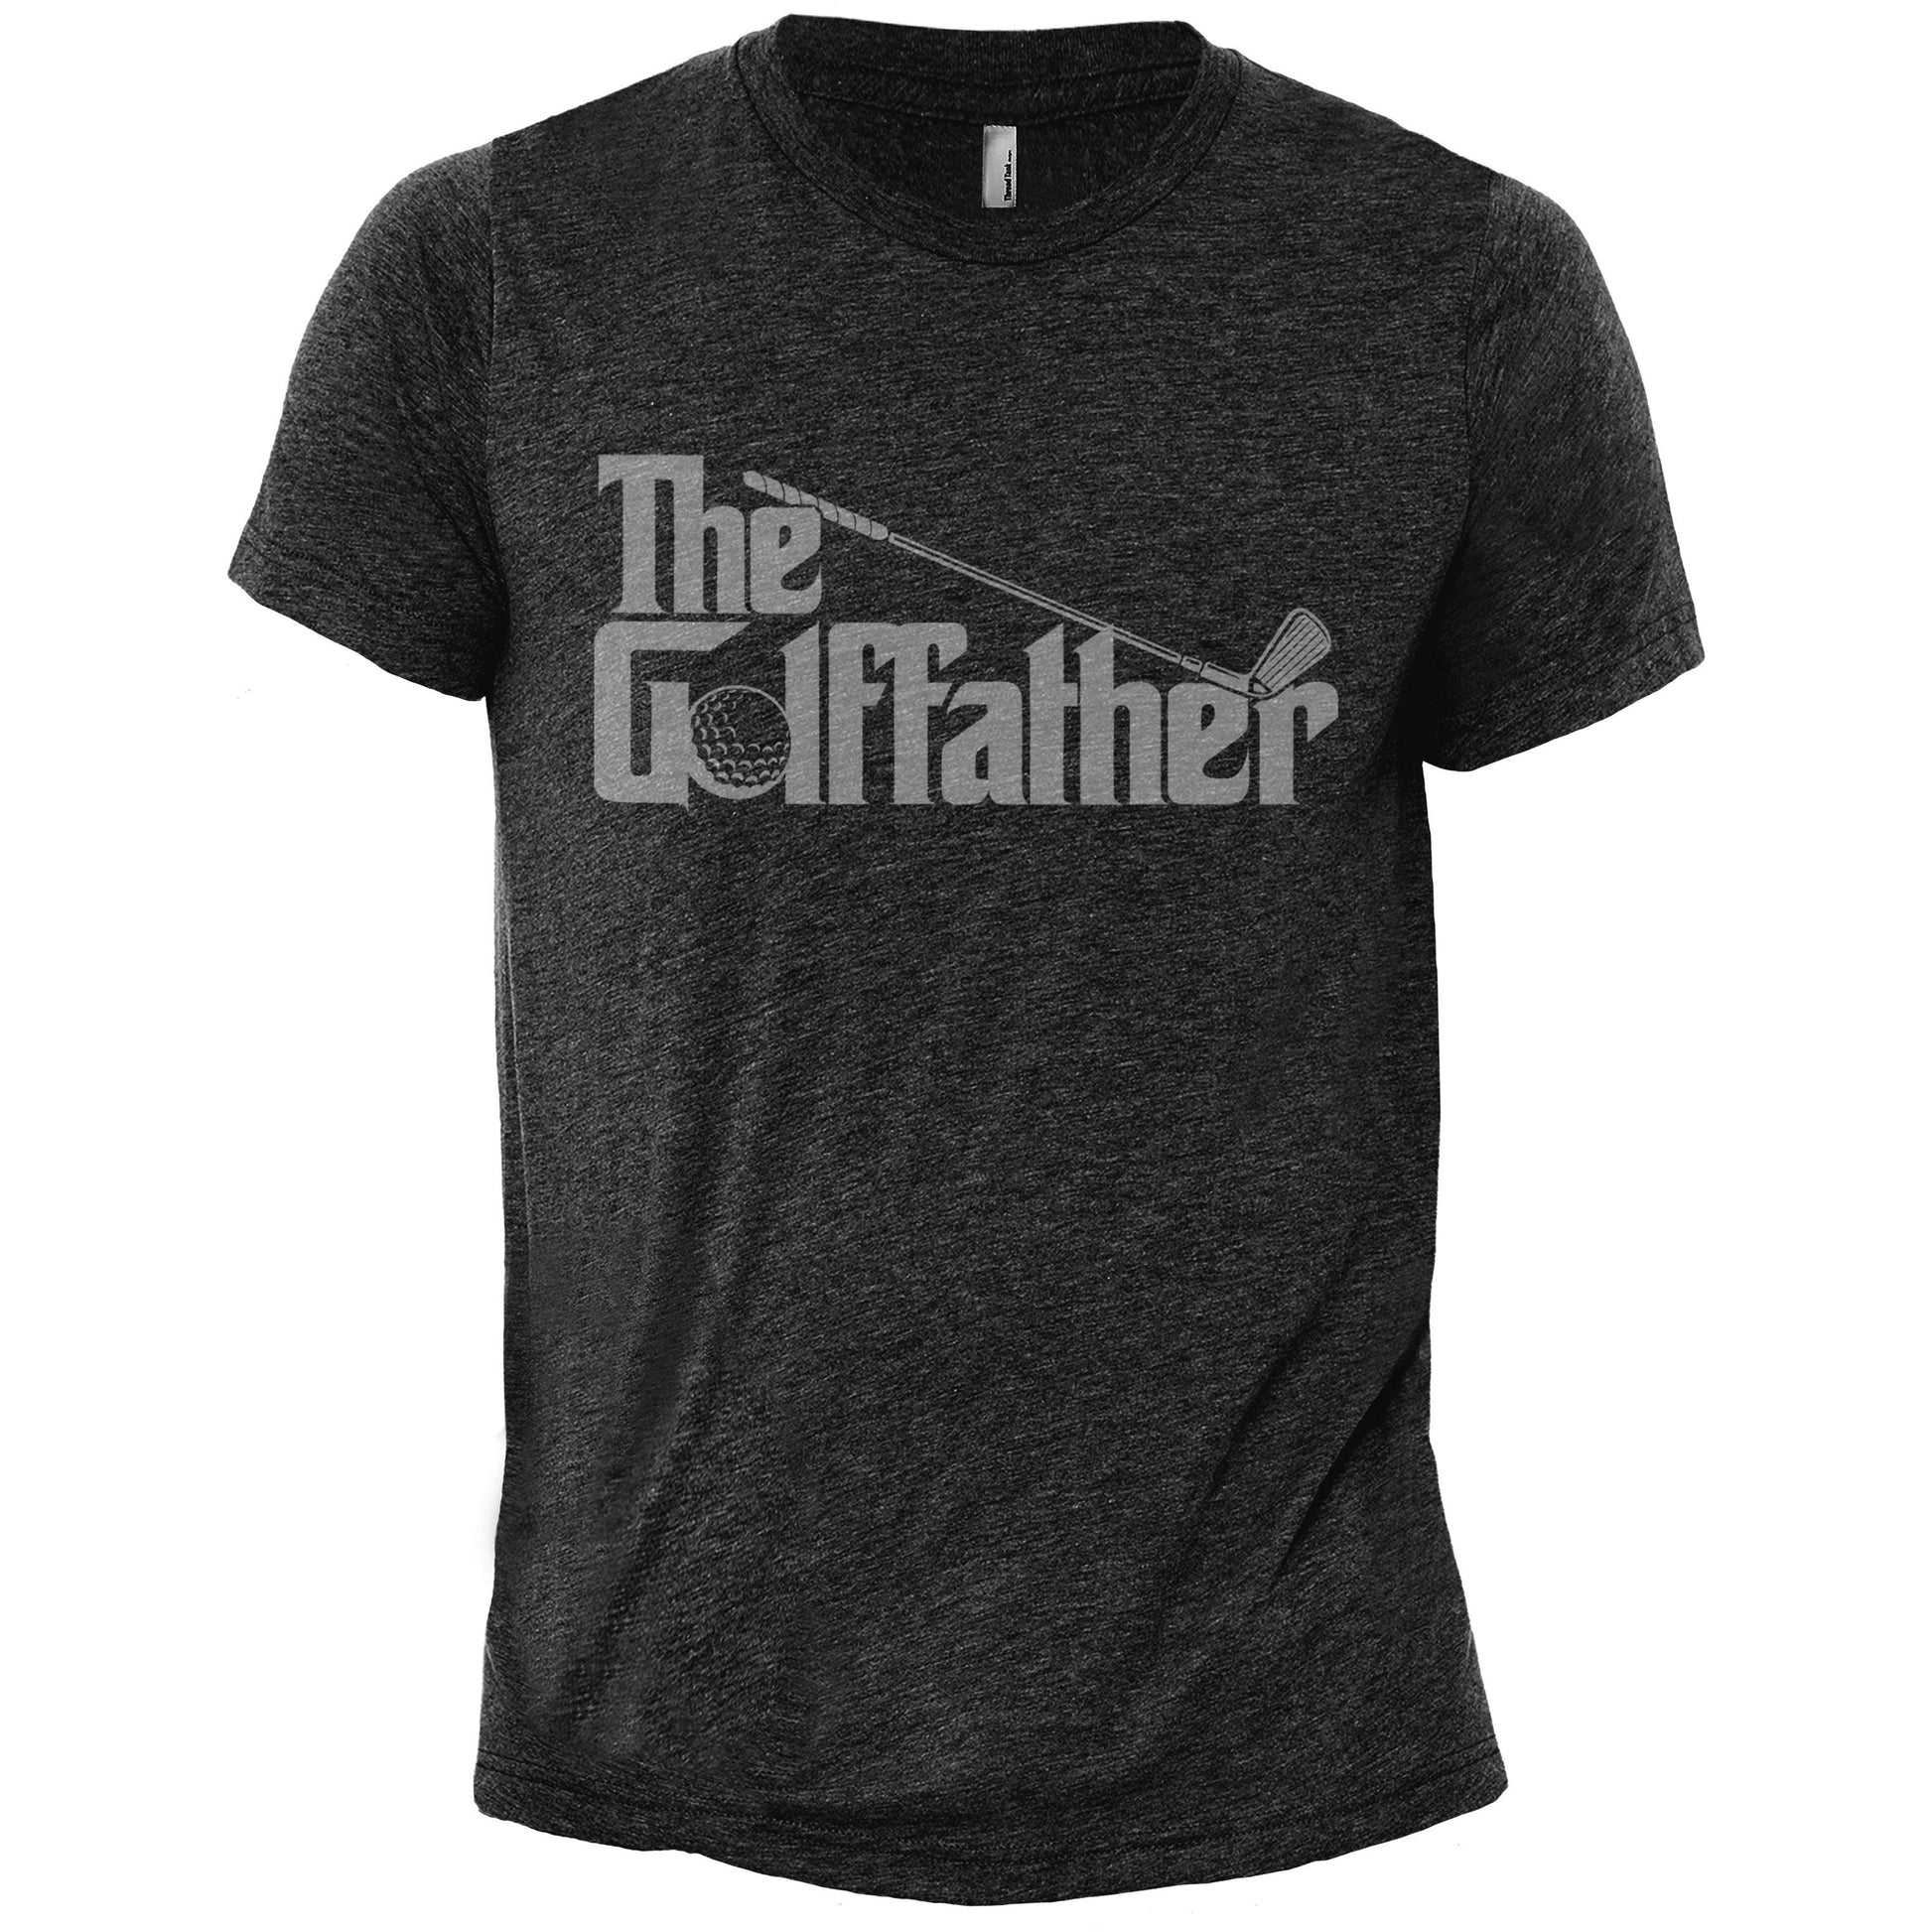 The Golf Father - Stories You Can Wear